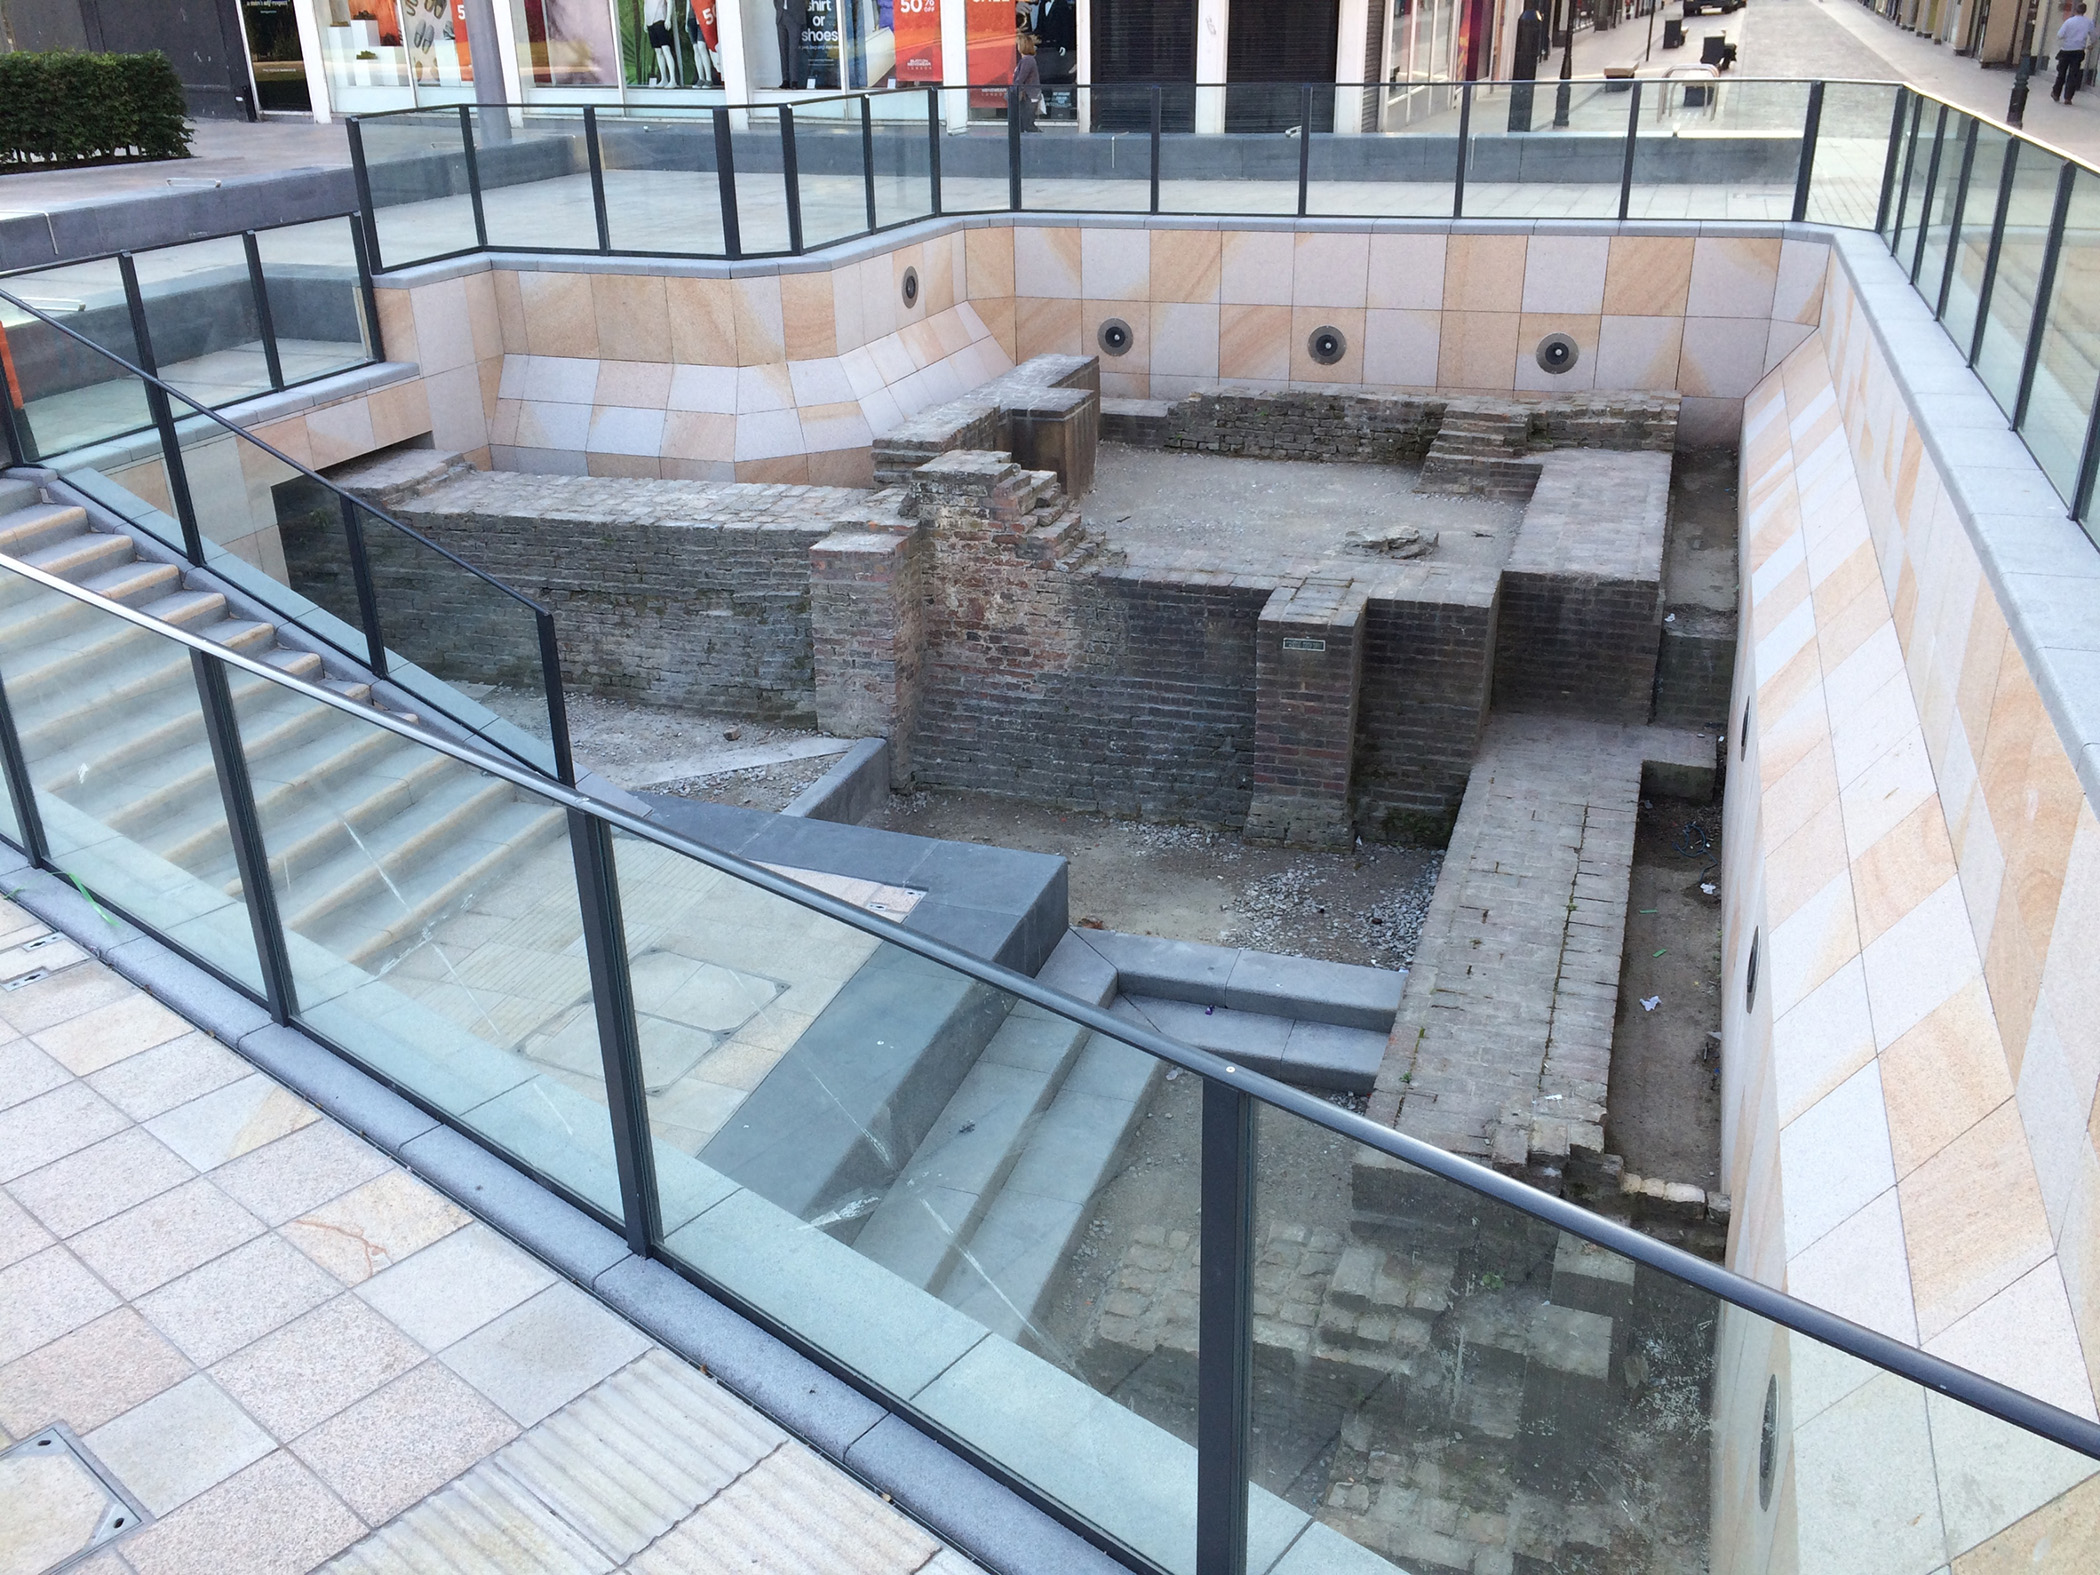 The site of Beverley Gate below ground level set in an open pedestrianised square